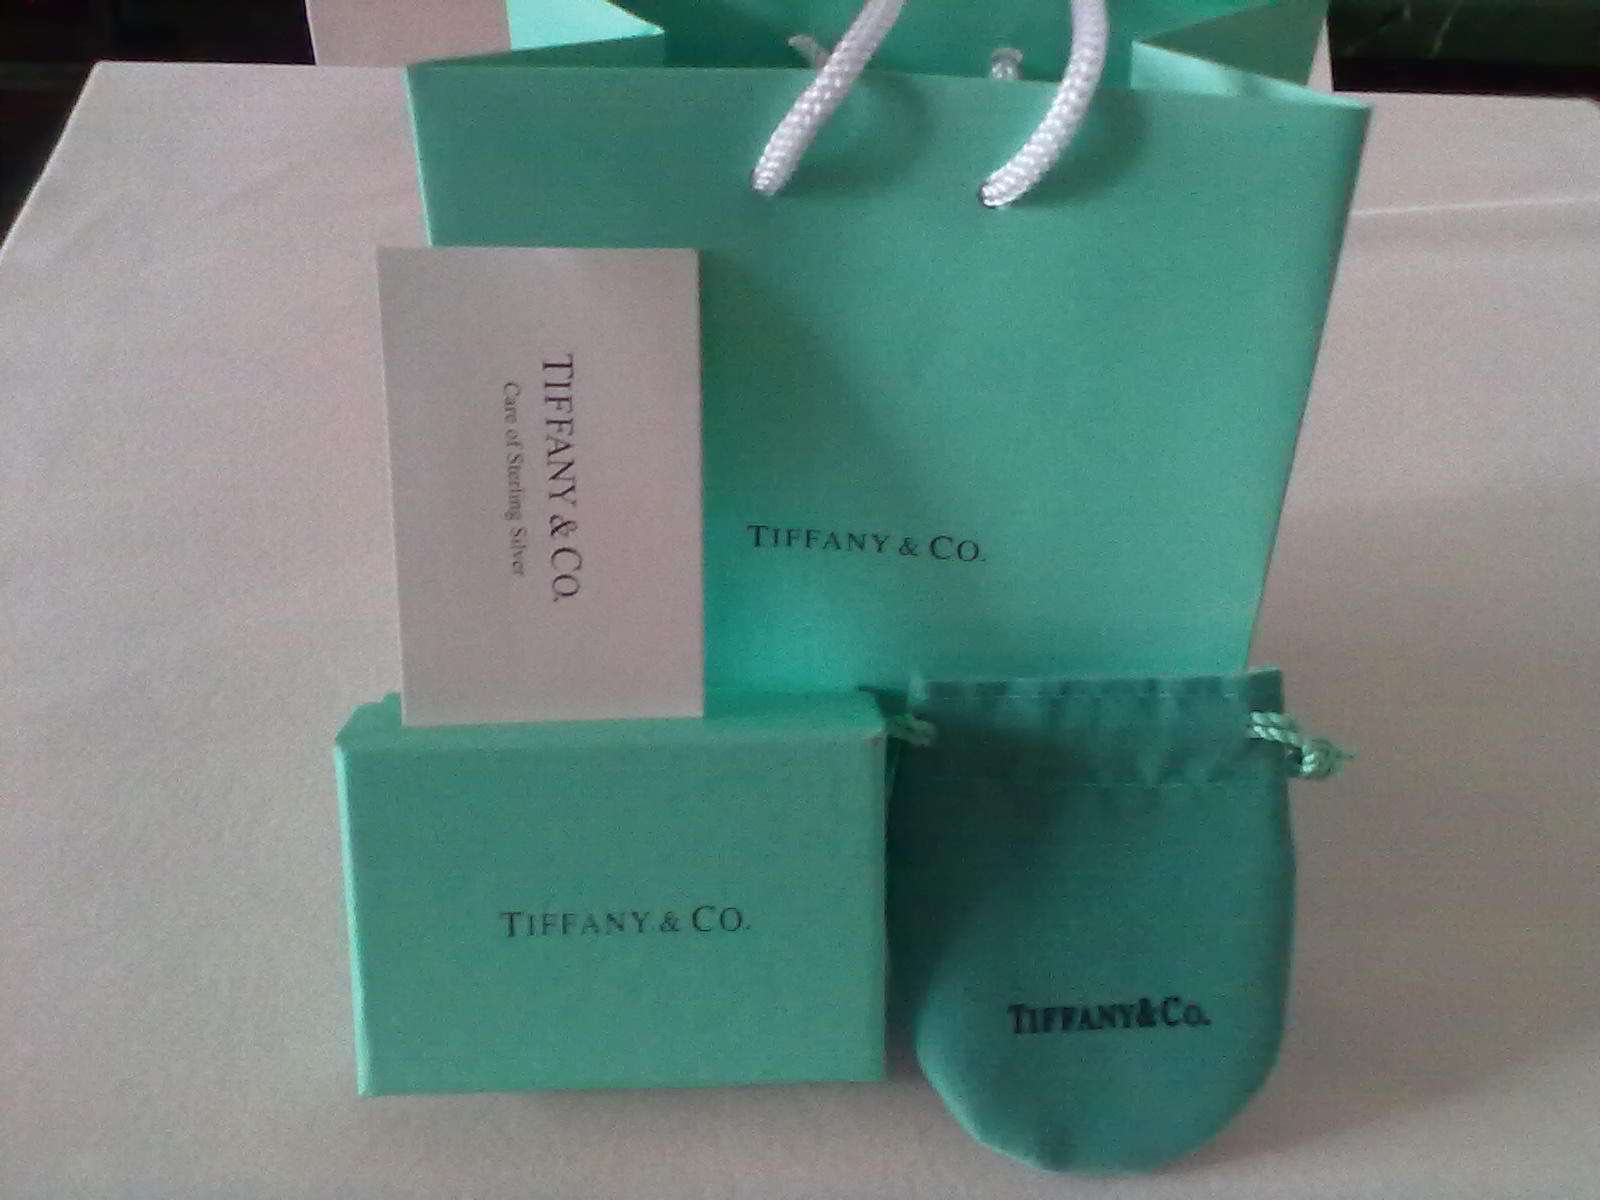 Tiffany Jewelry Packaging